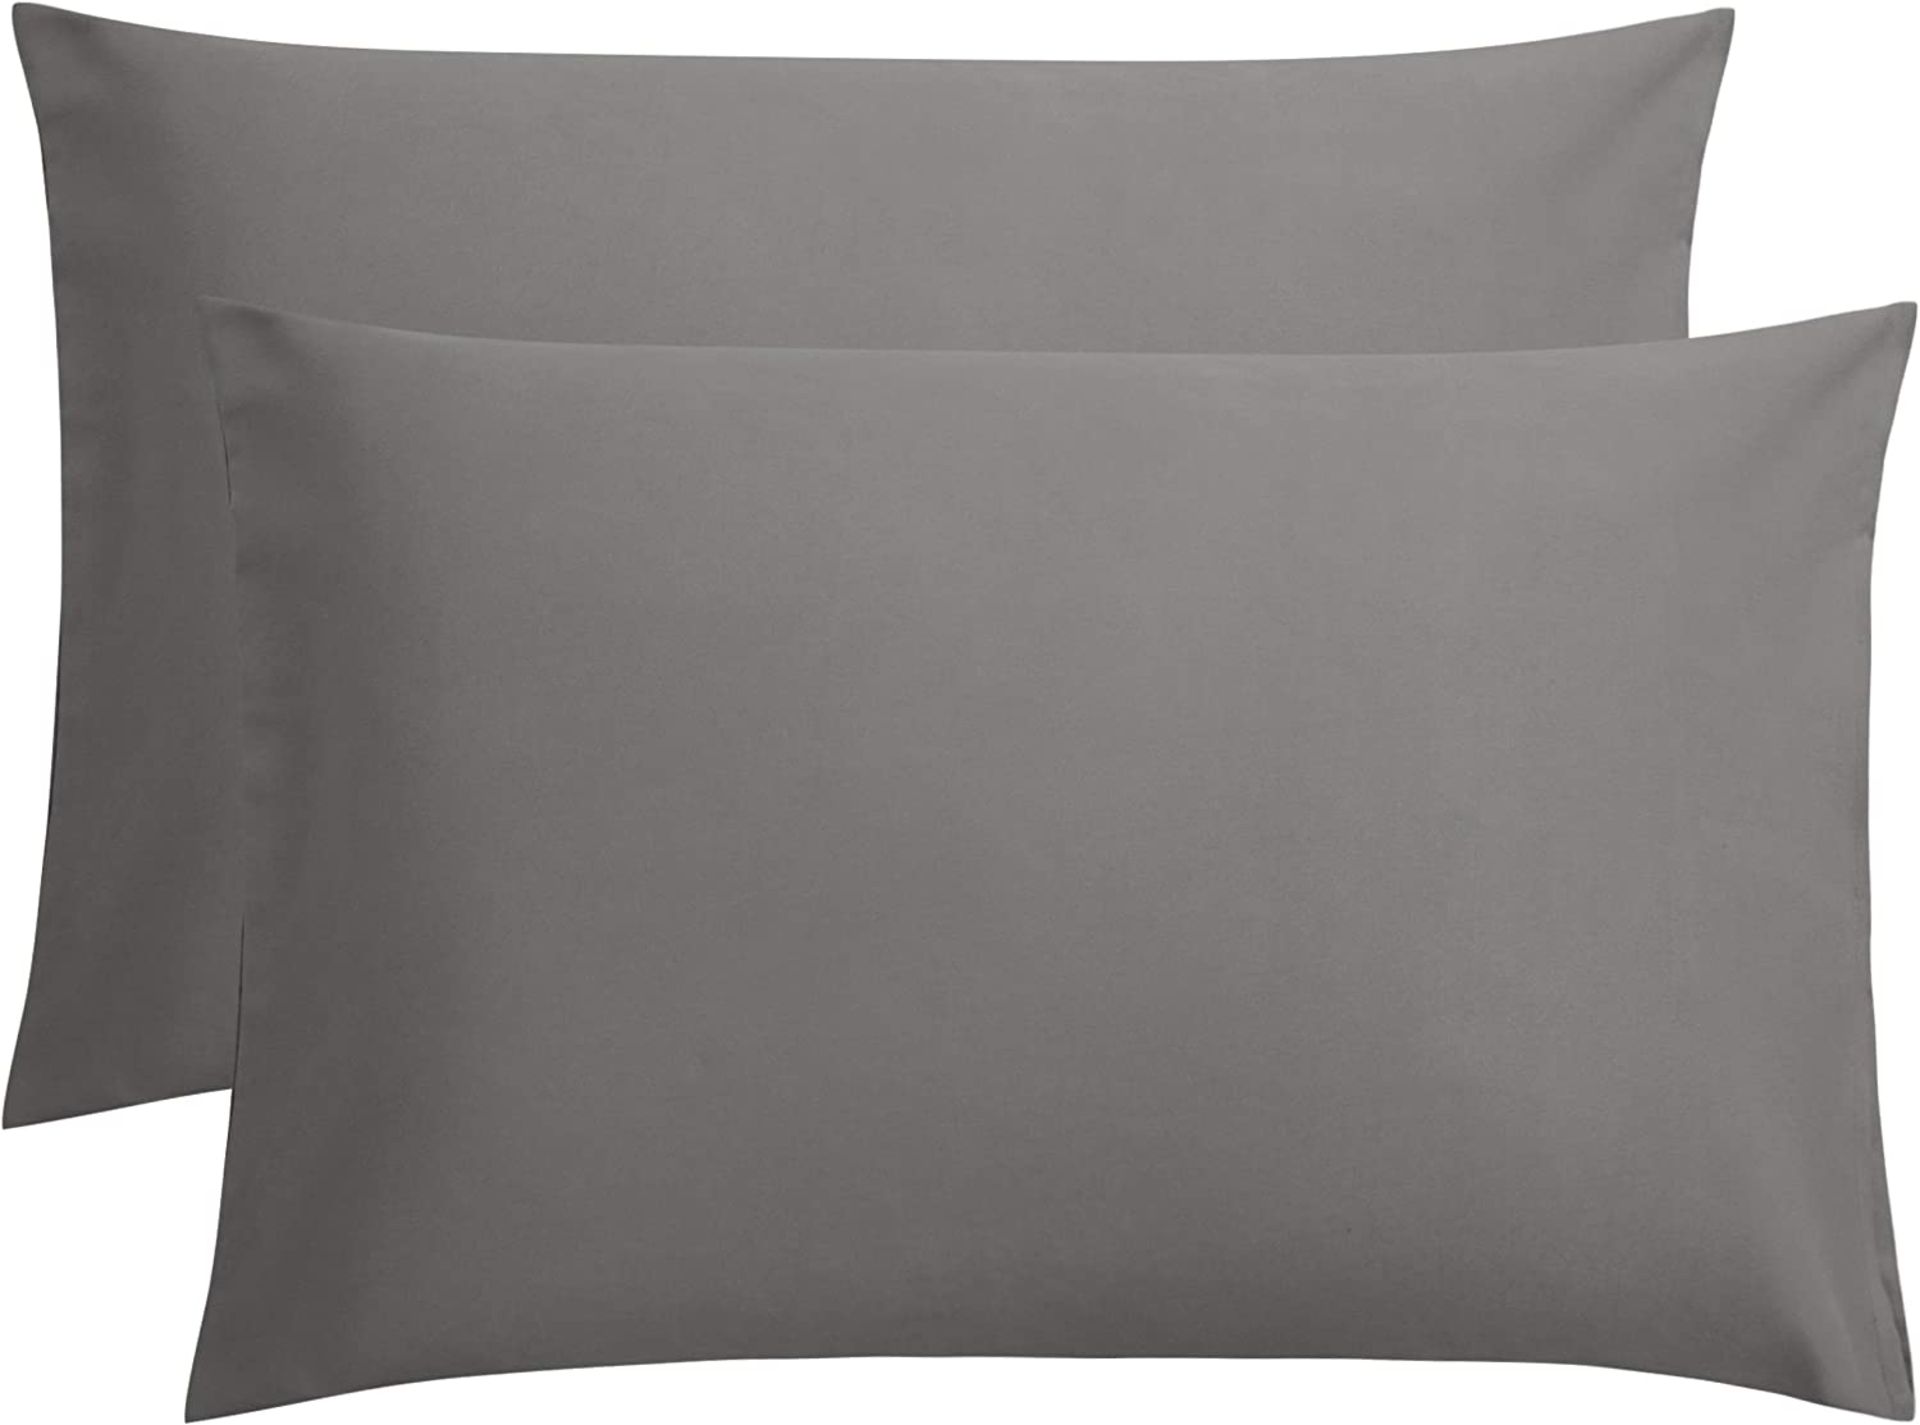 36 X BRAND NEW LUXURY SETS OF 2 PILLOWCASES GREY (21494.01GY)